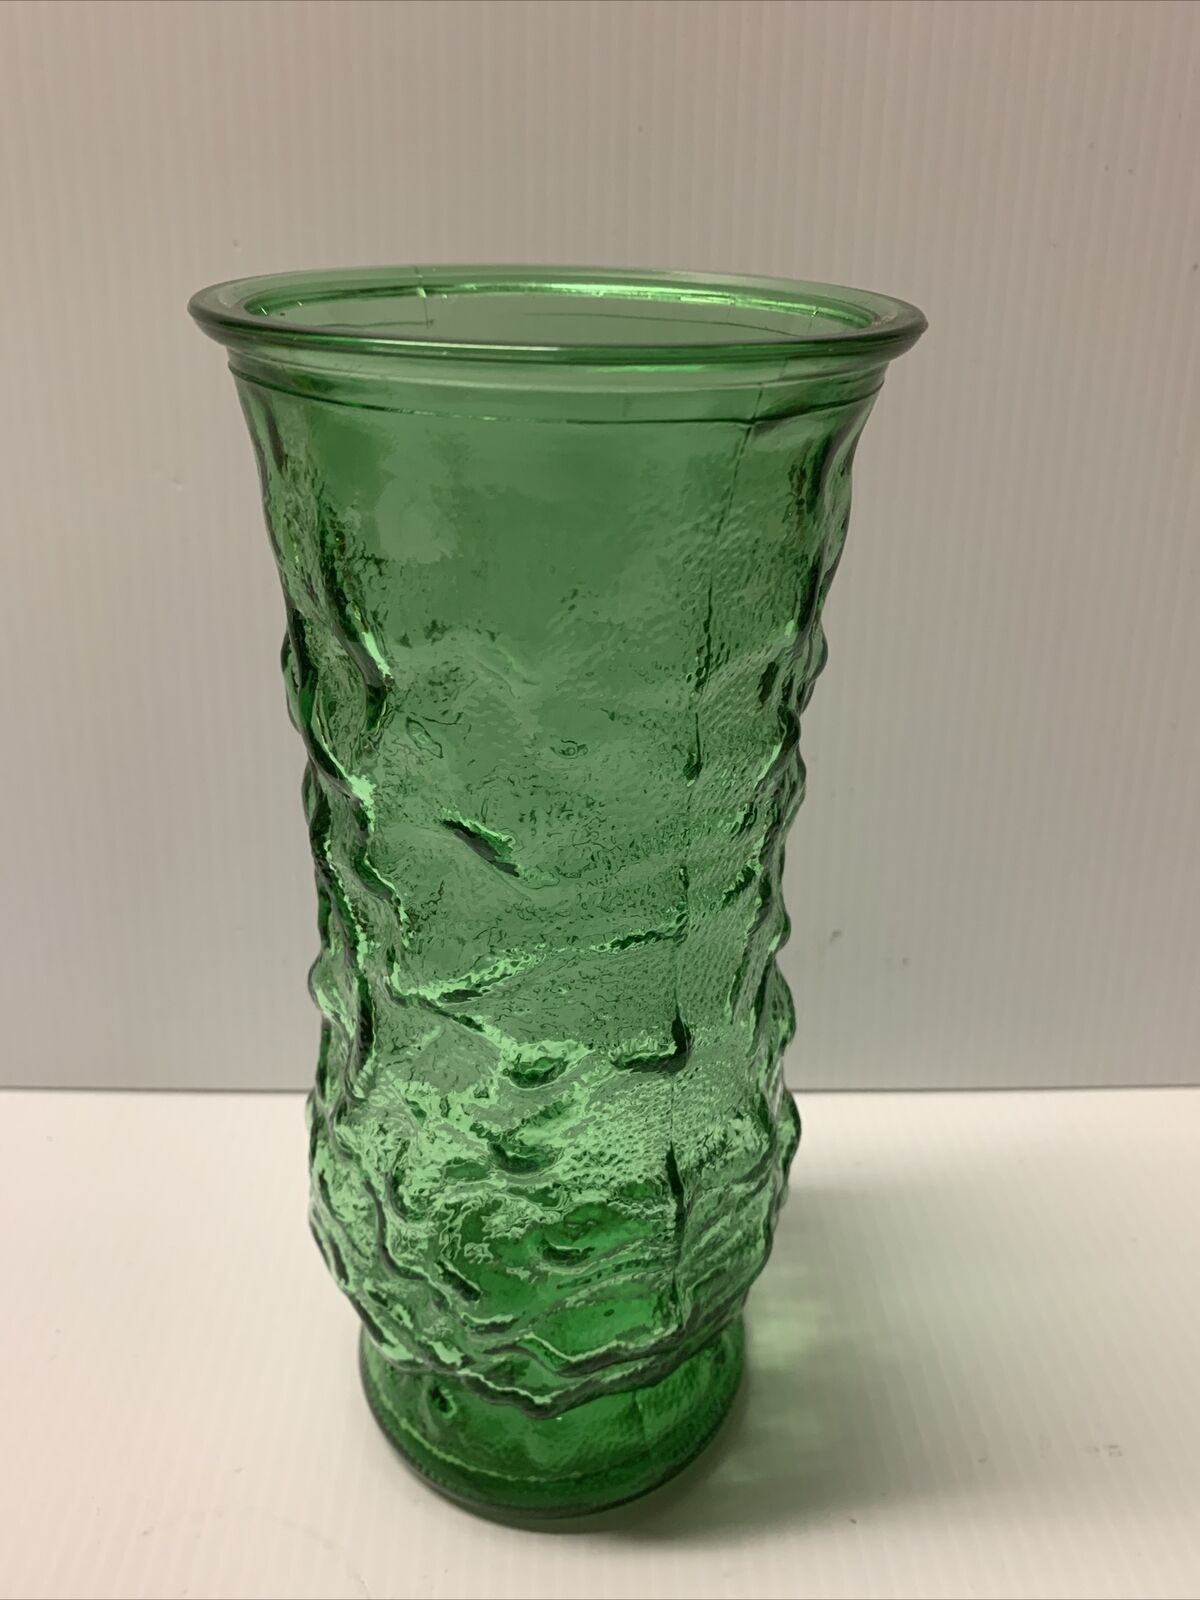 Vintage E. O. Brody Co. Green Crinkle Floral Vase #110 4” X 8 3/4” Tall